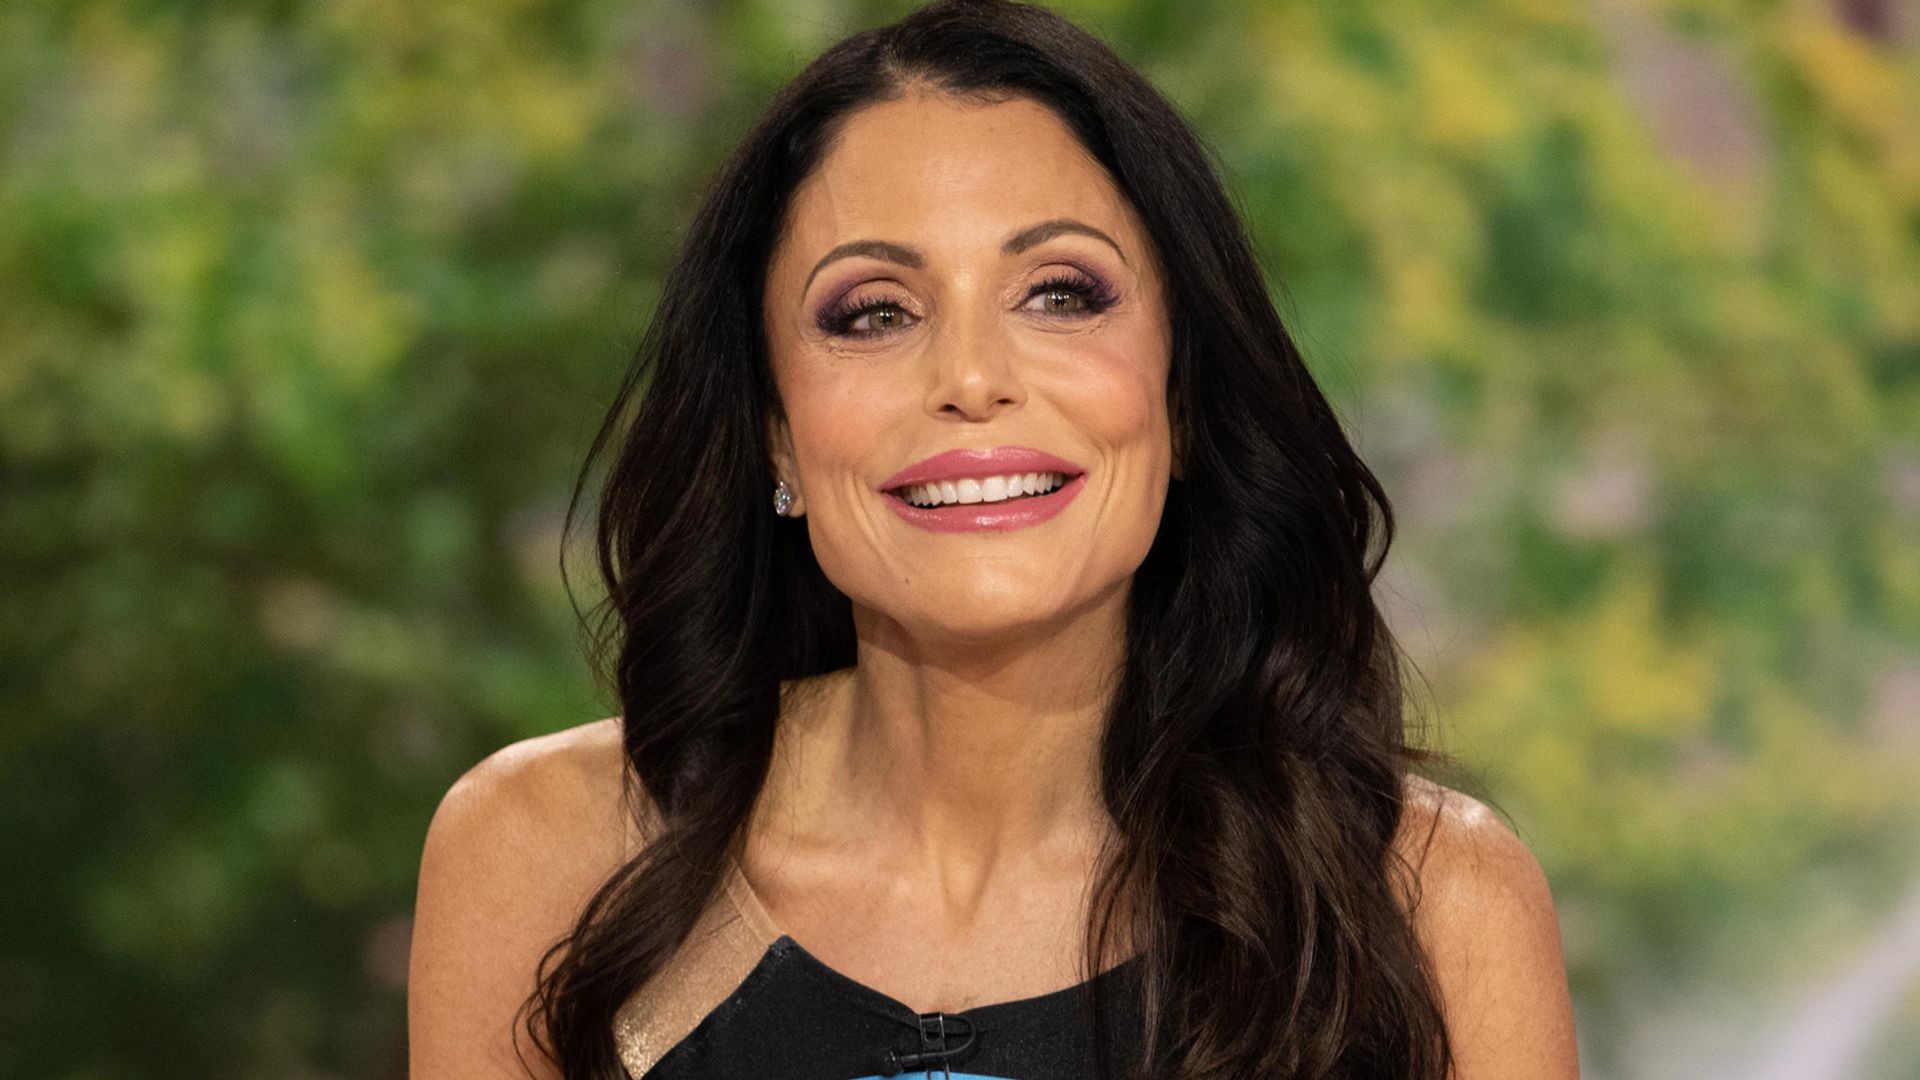 Bethenny Frankel raved about this anti-aging Vitamin C serum you can buy on Amazon